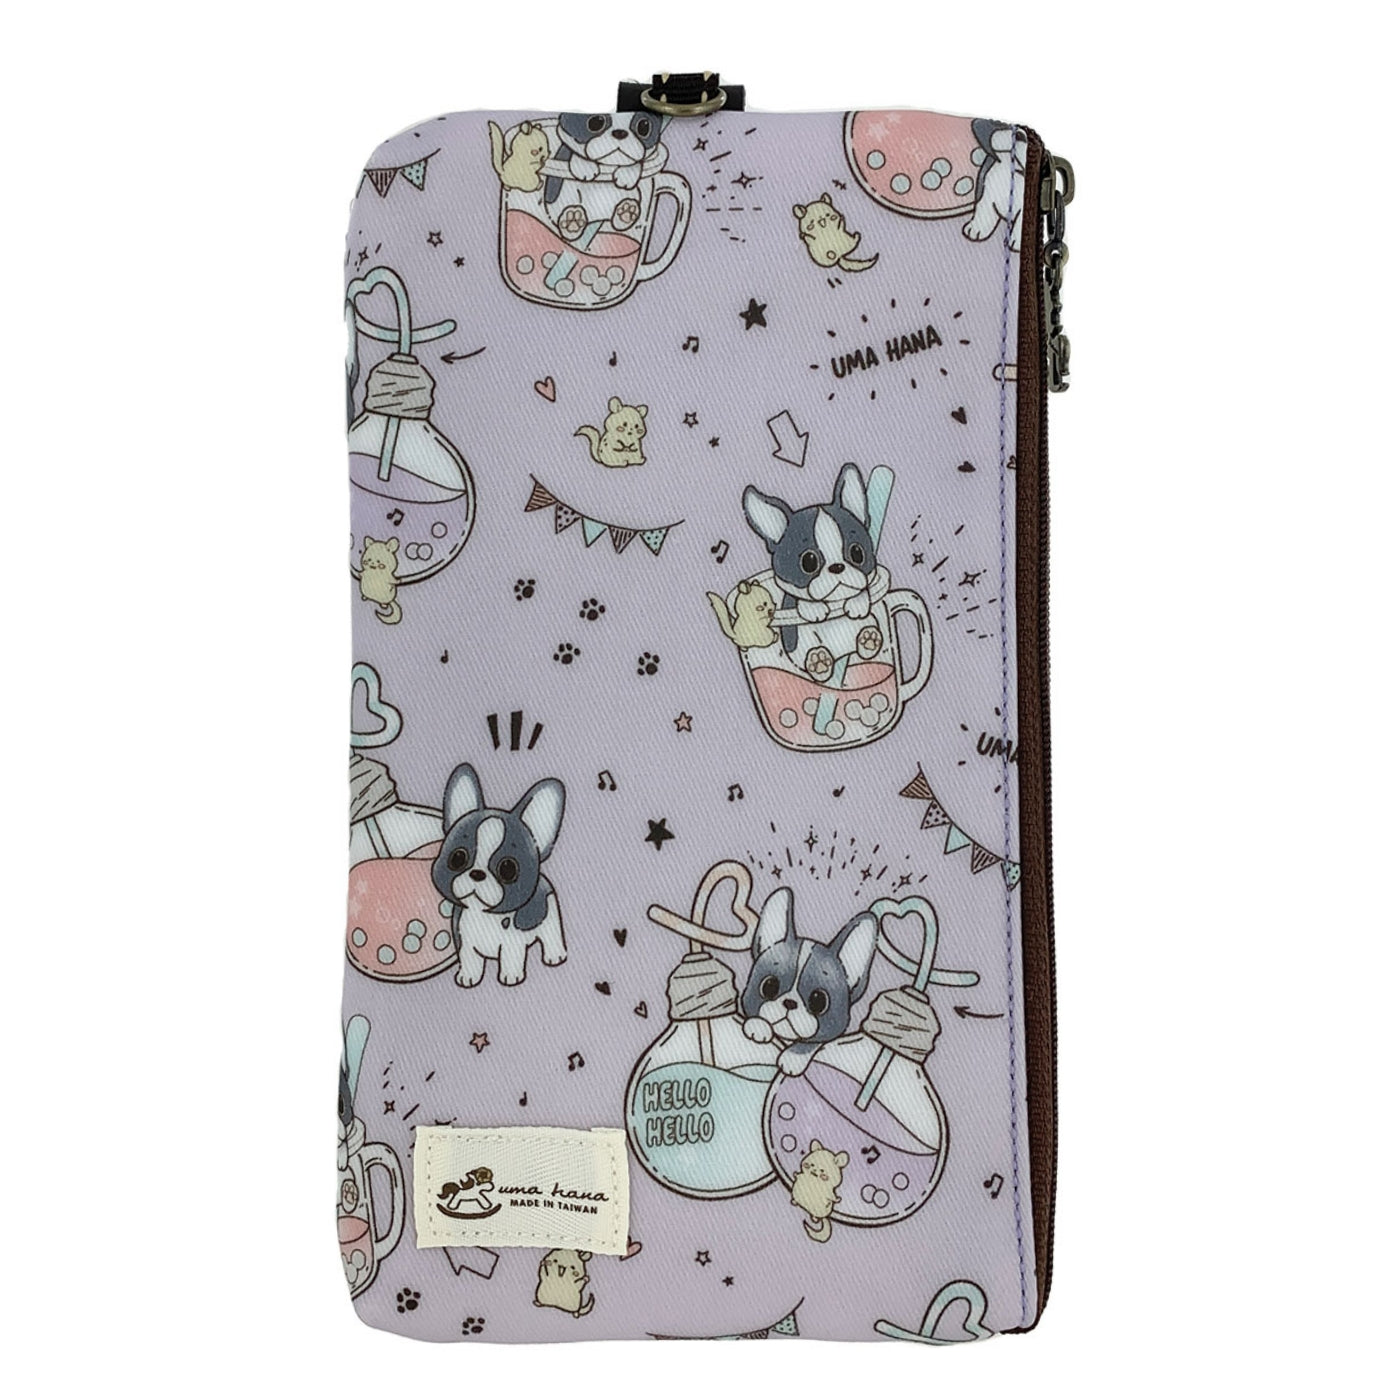 Purple Boba Frenchie Phone Pouch